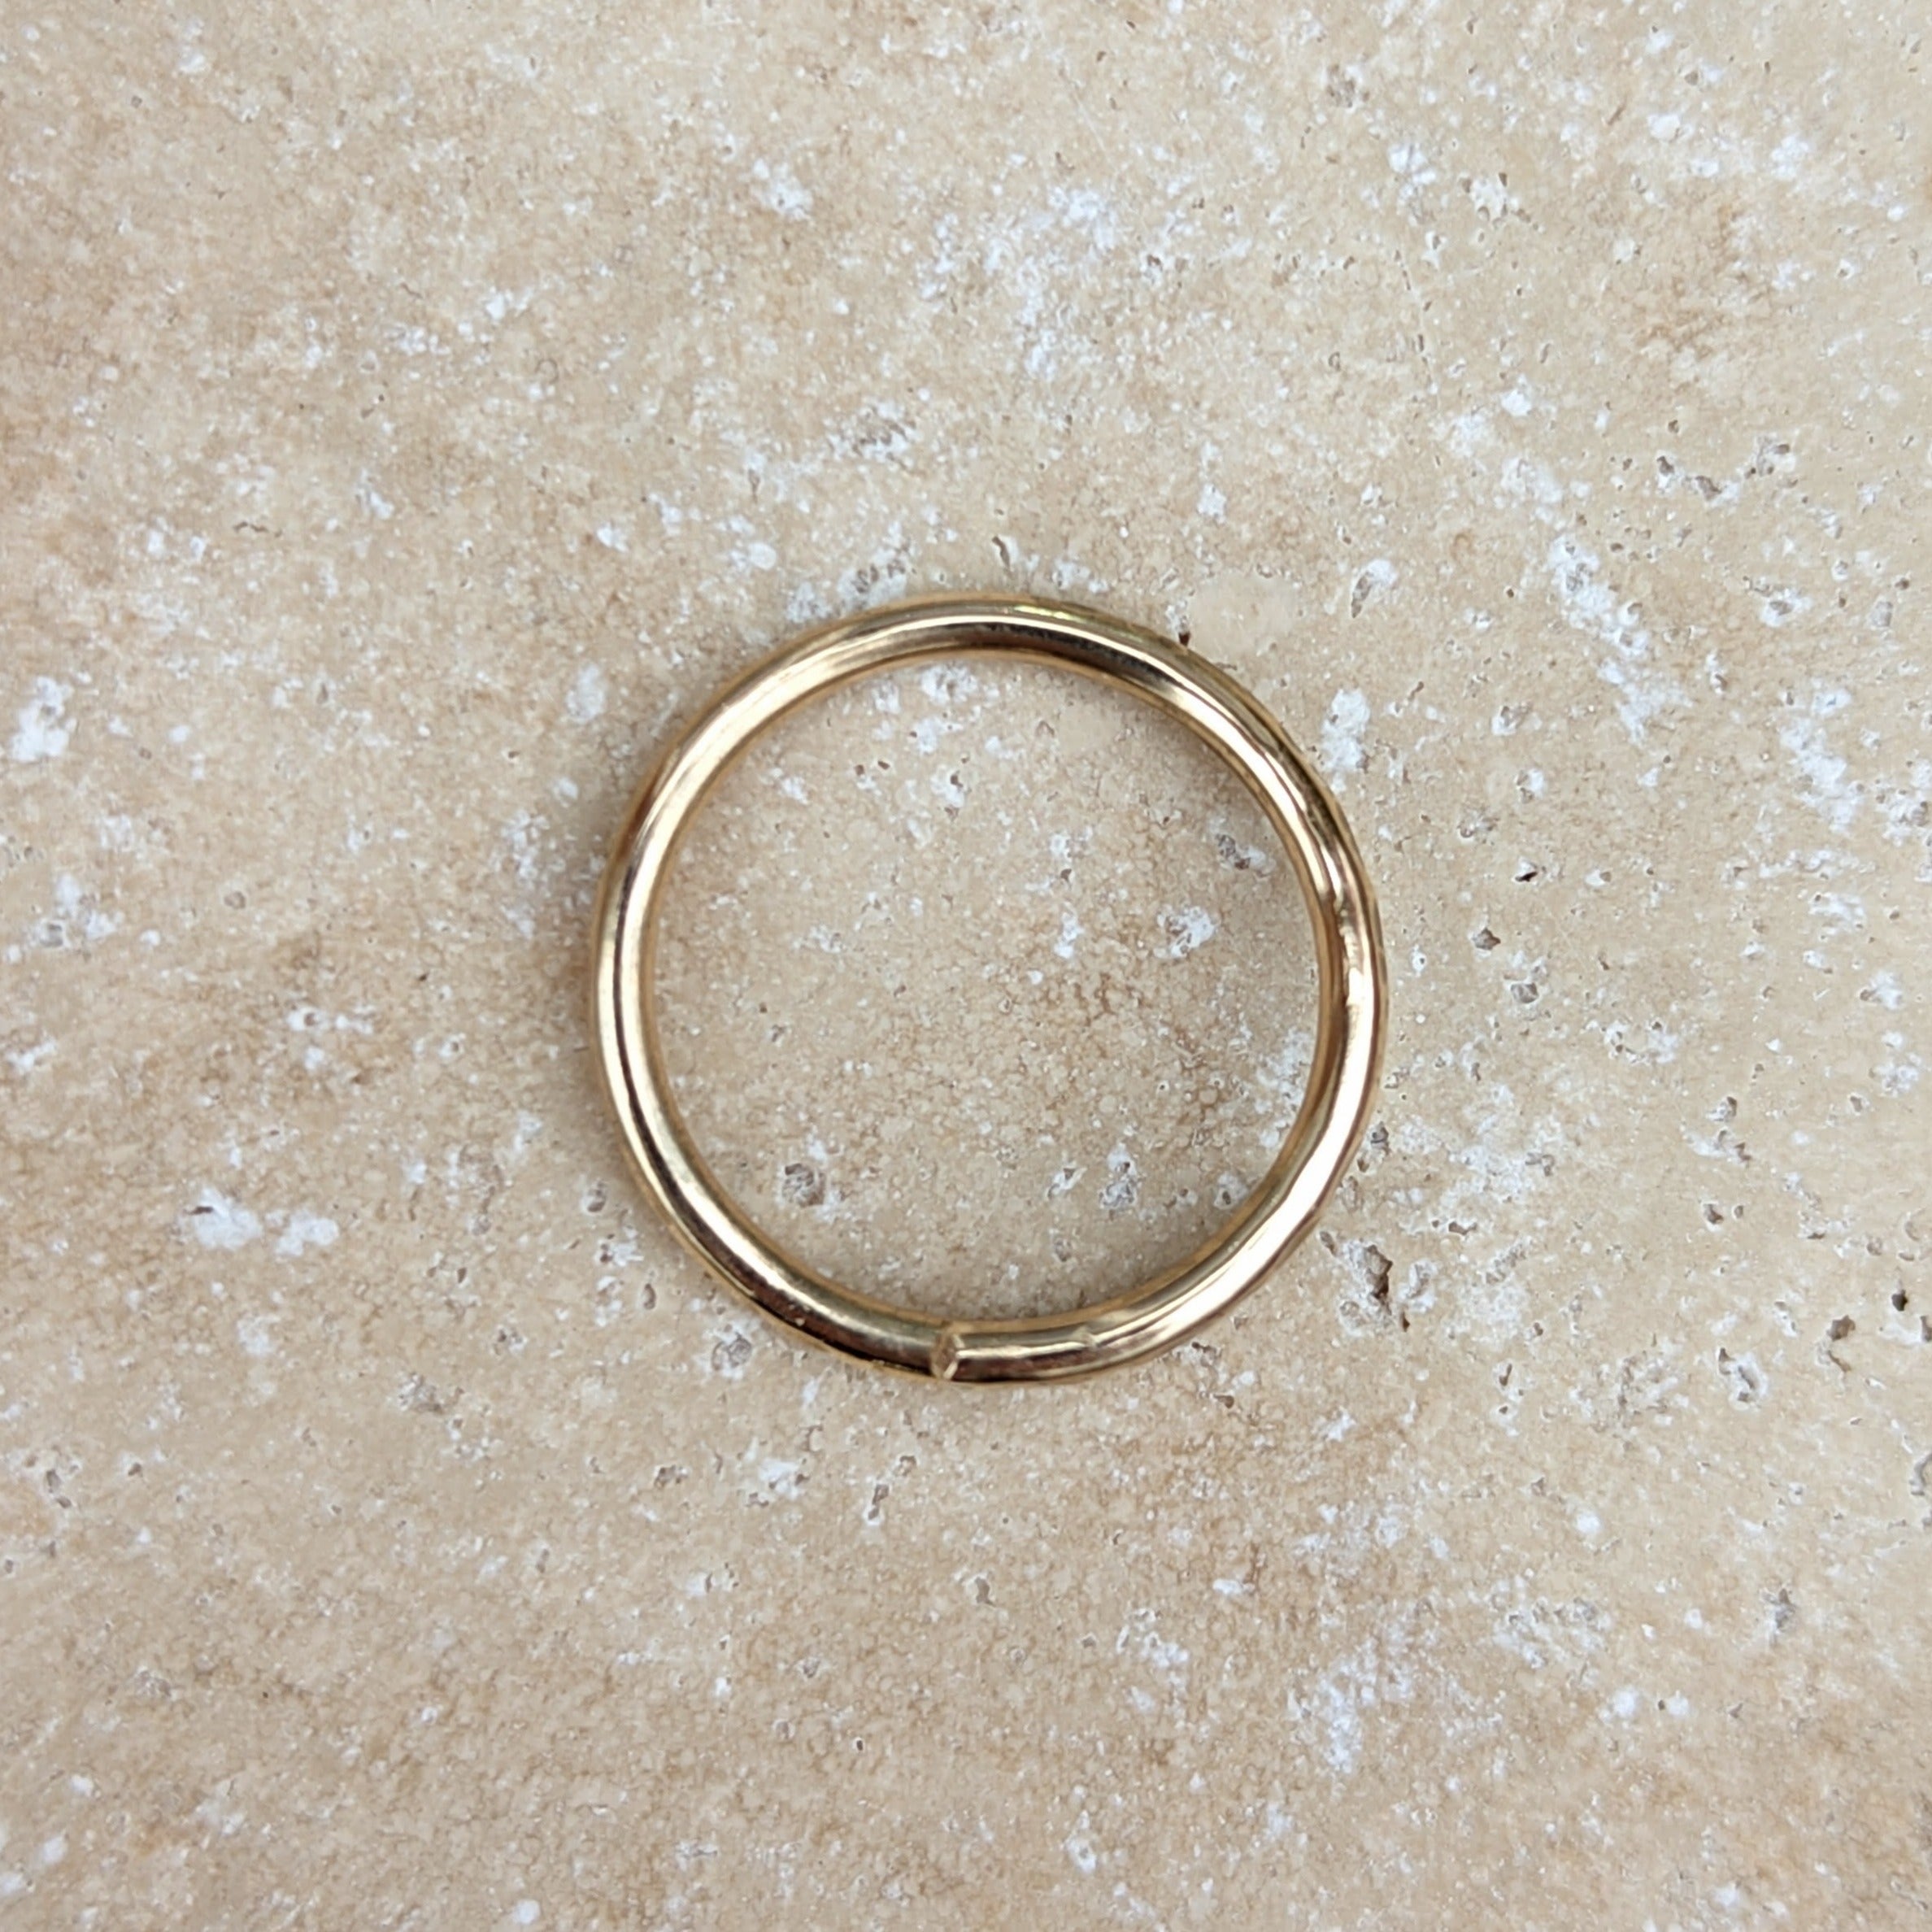 Gold ring from above on tile